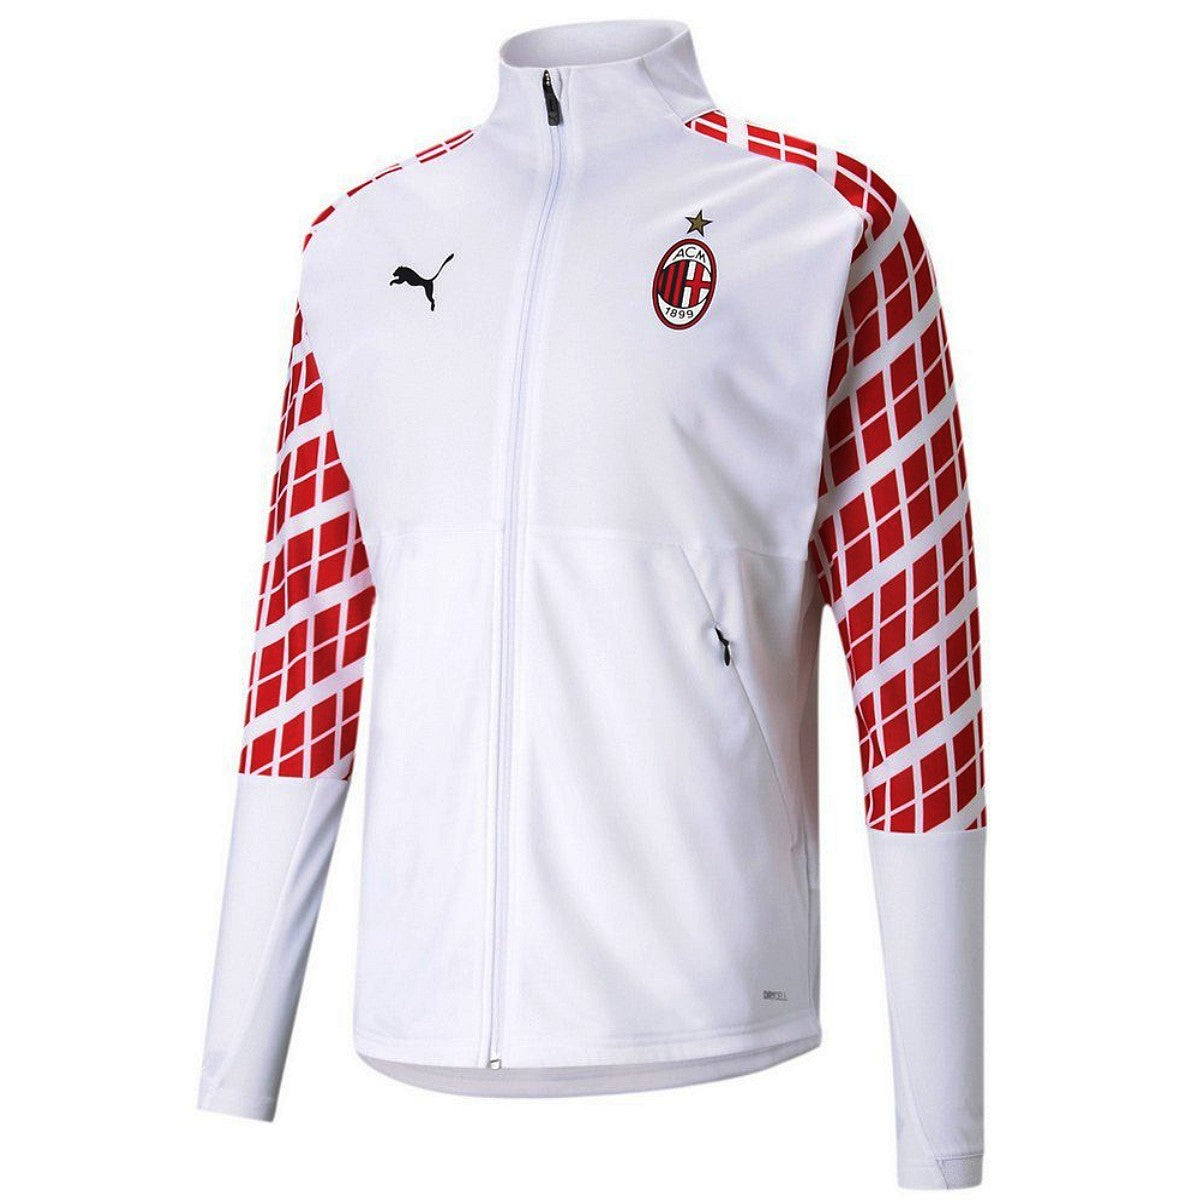 AC MILAN FOOTBALL SOCCER JACKET COAT TRAINING LOTTO WHITE RED #LOTTO # ACMilan in 2023